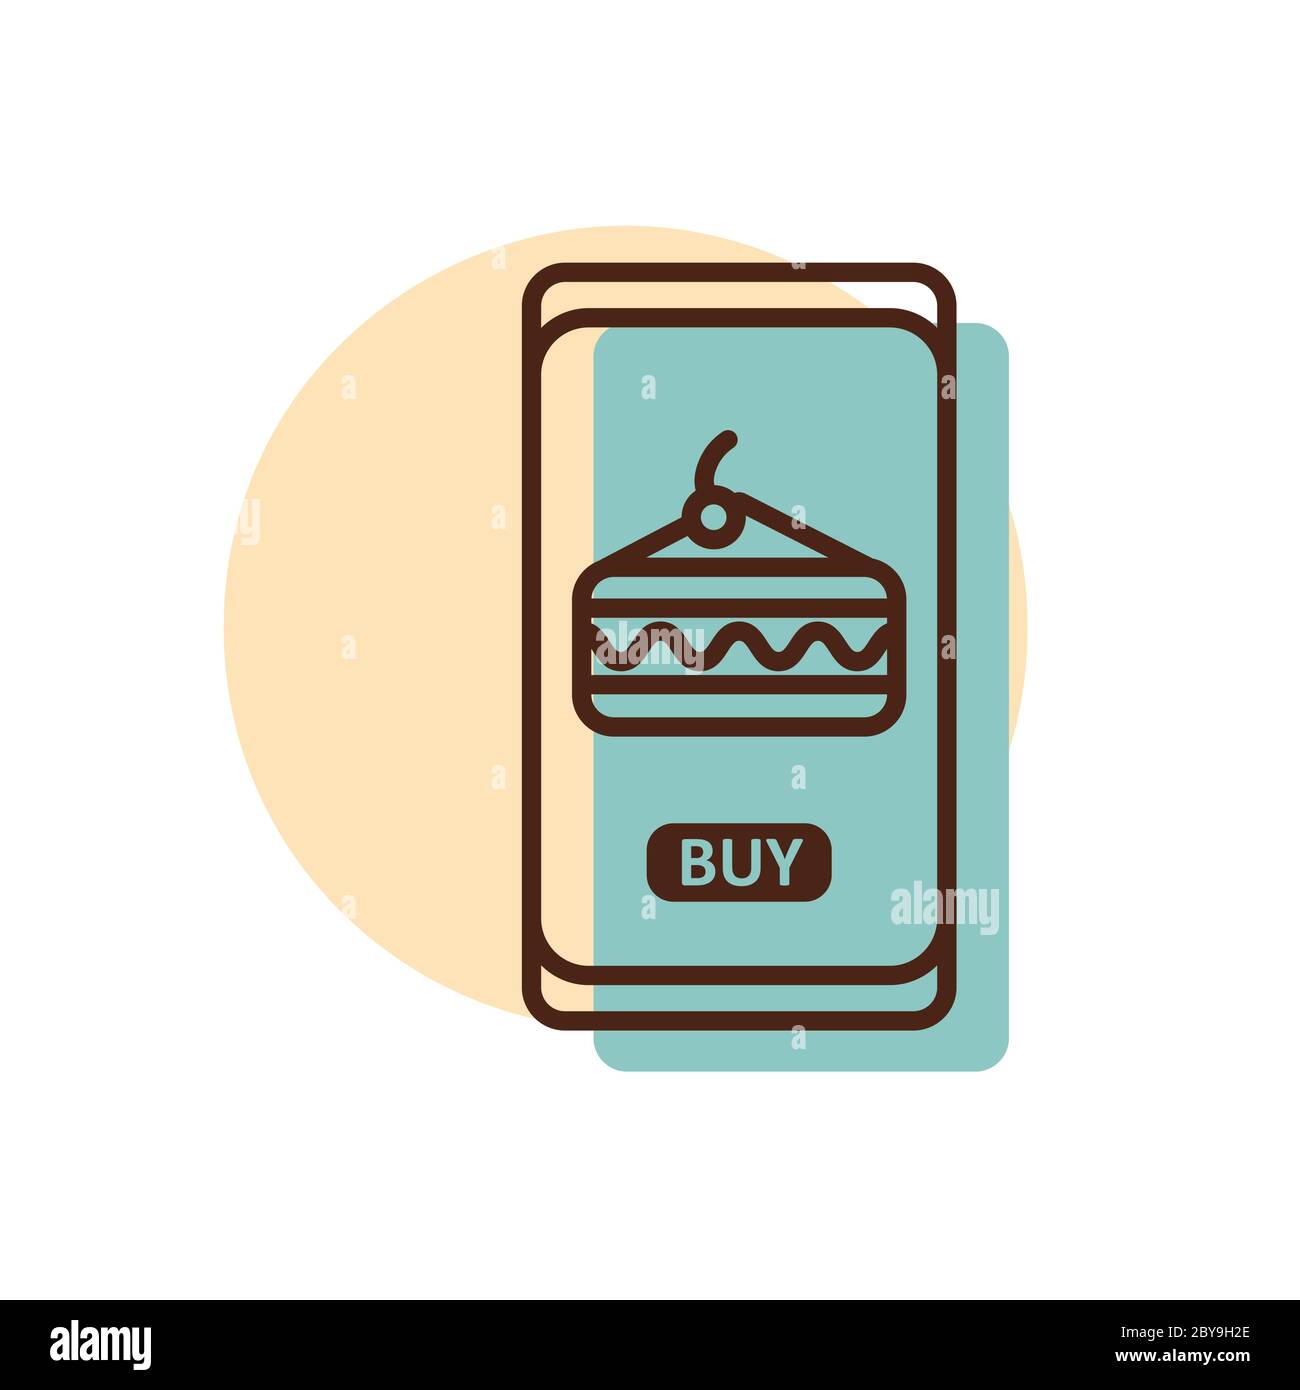 Cake online ordering application with menu poster Vector Image